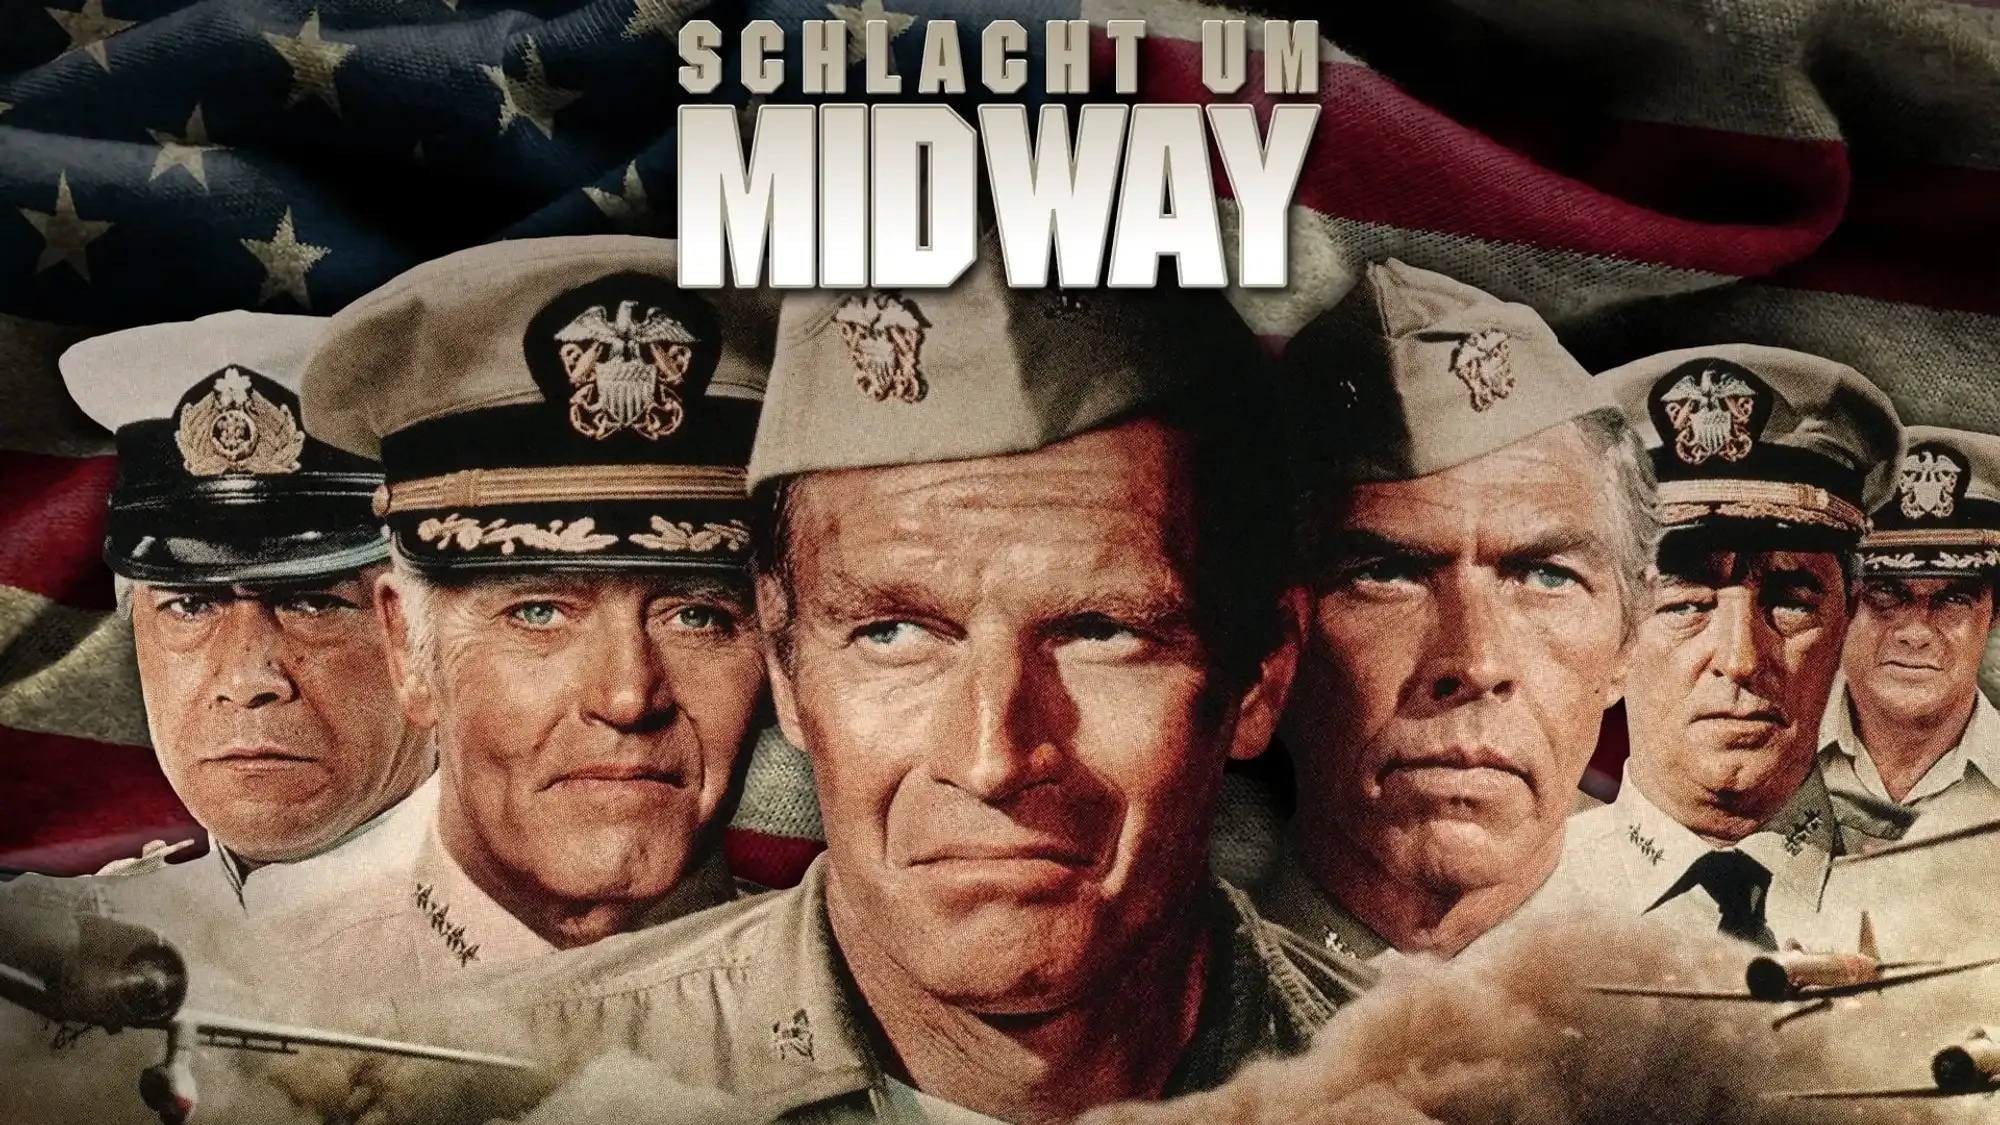 Midway movie review